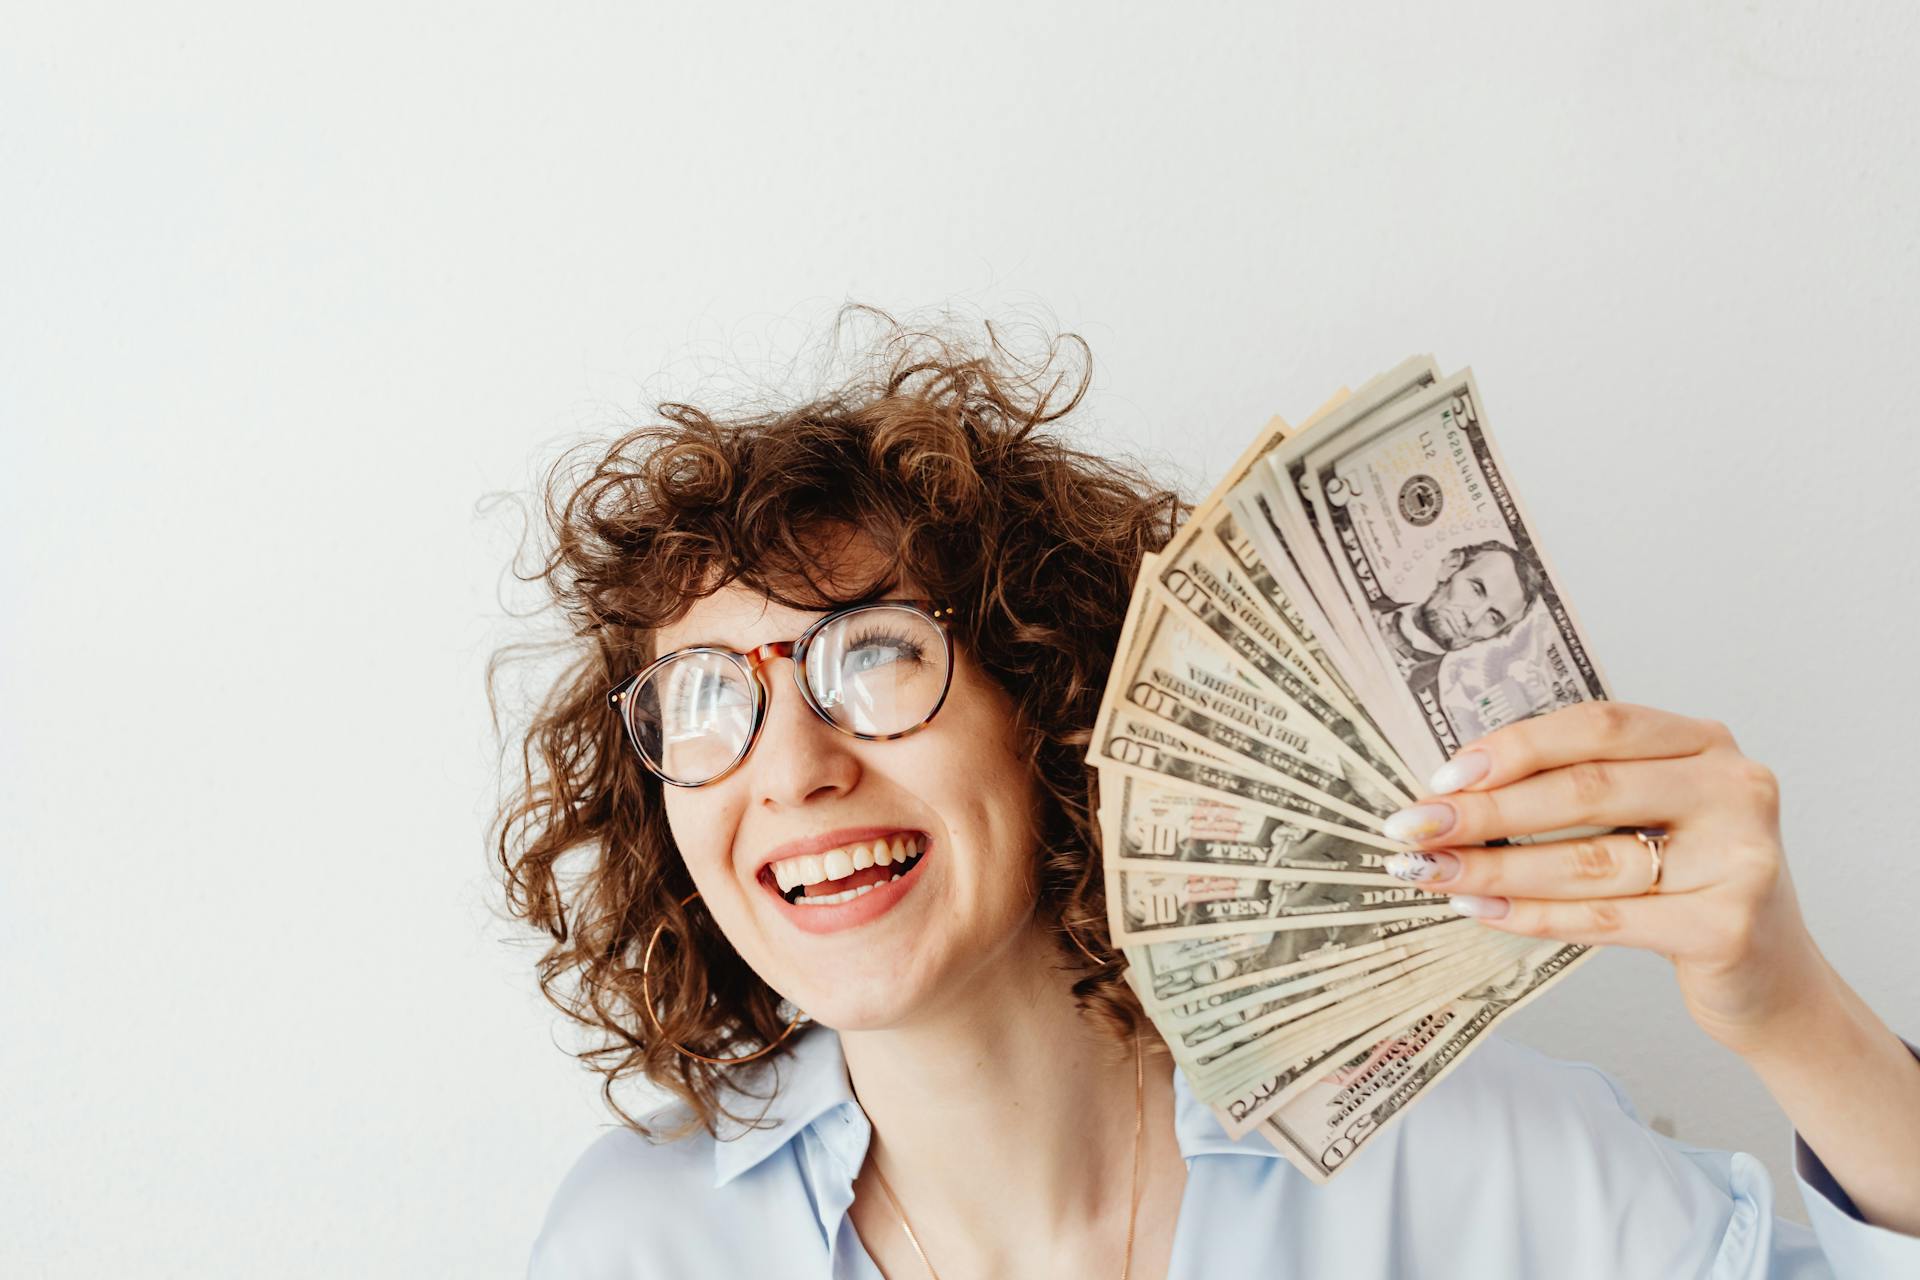 A woman showing off her cash | Source: Pexels